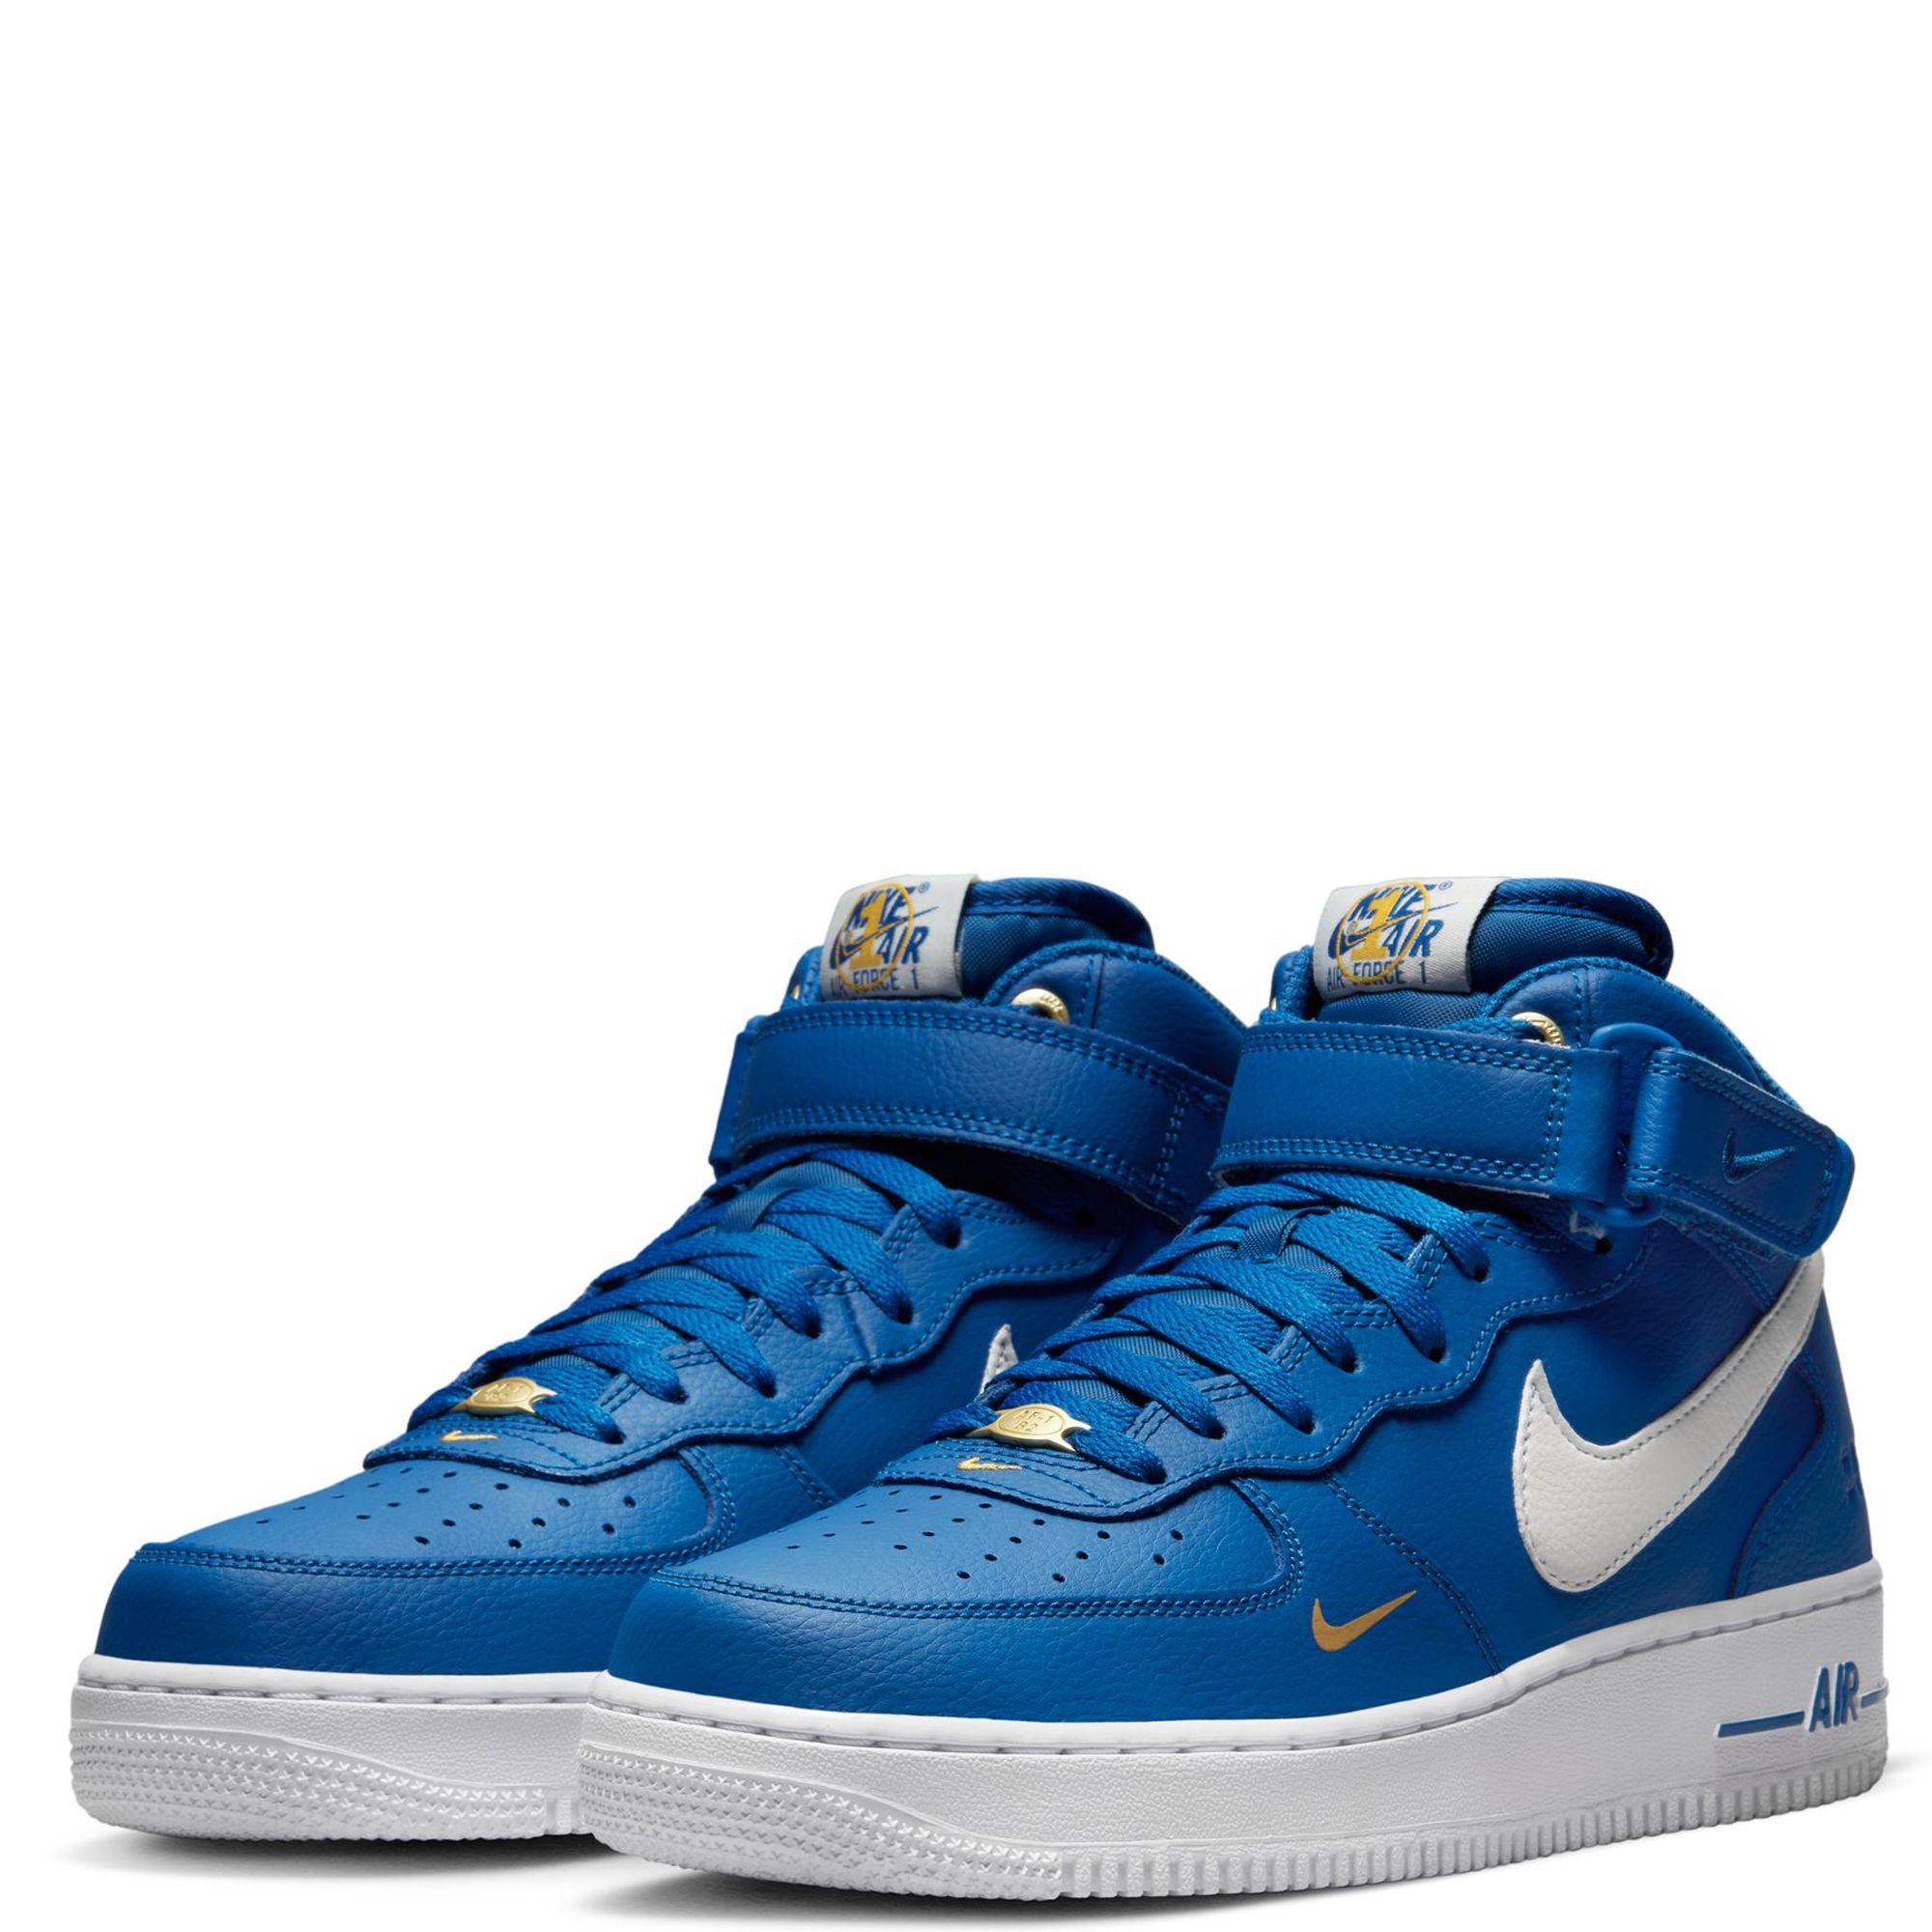 AIR FORCE 1 MID '07 LV8 DR9513 400